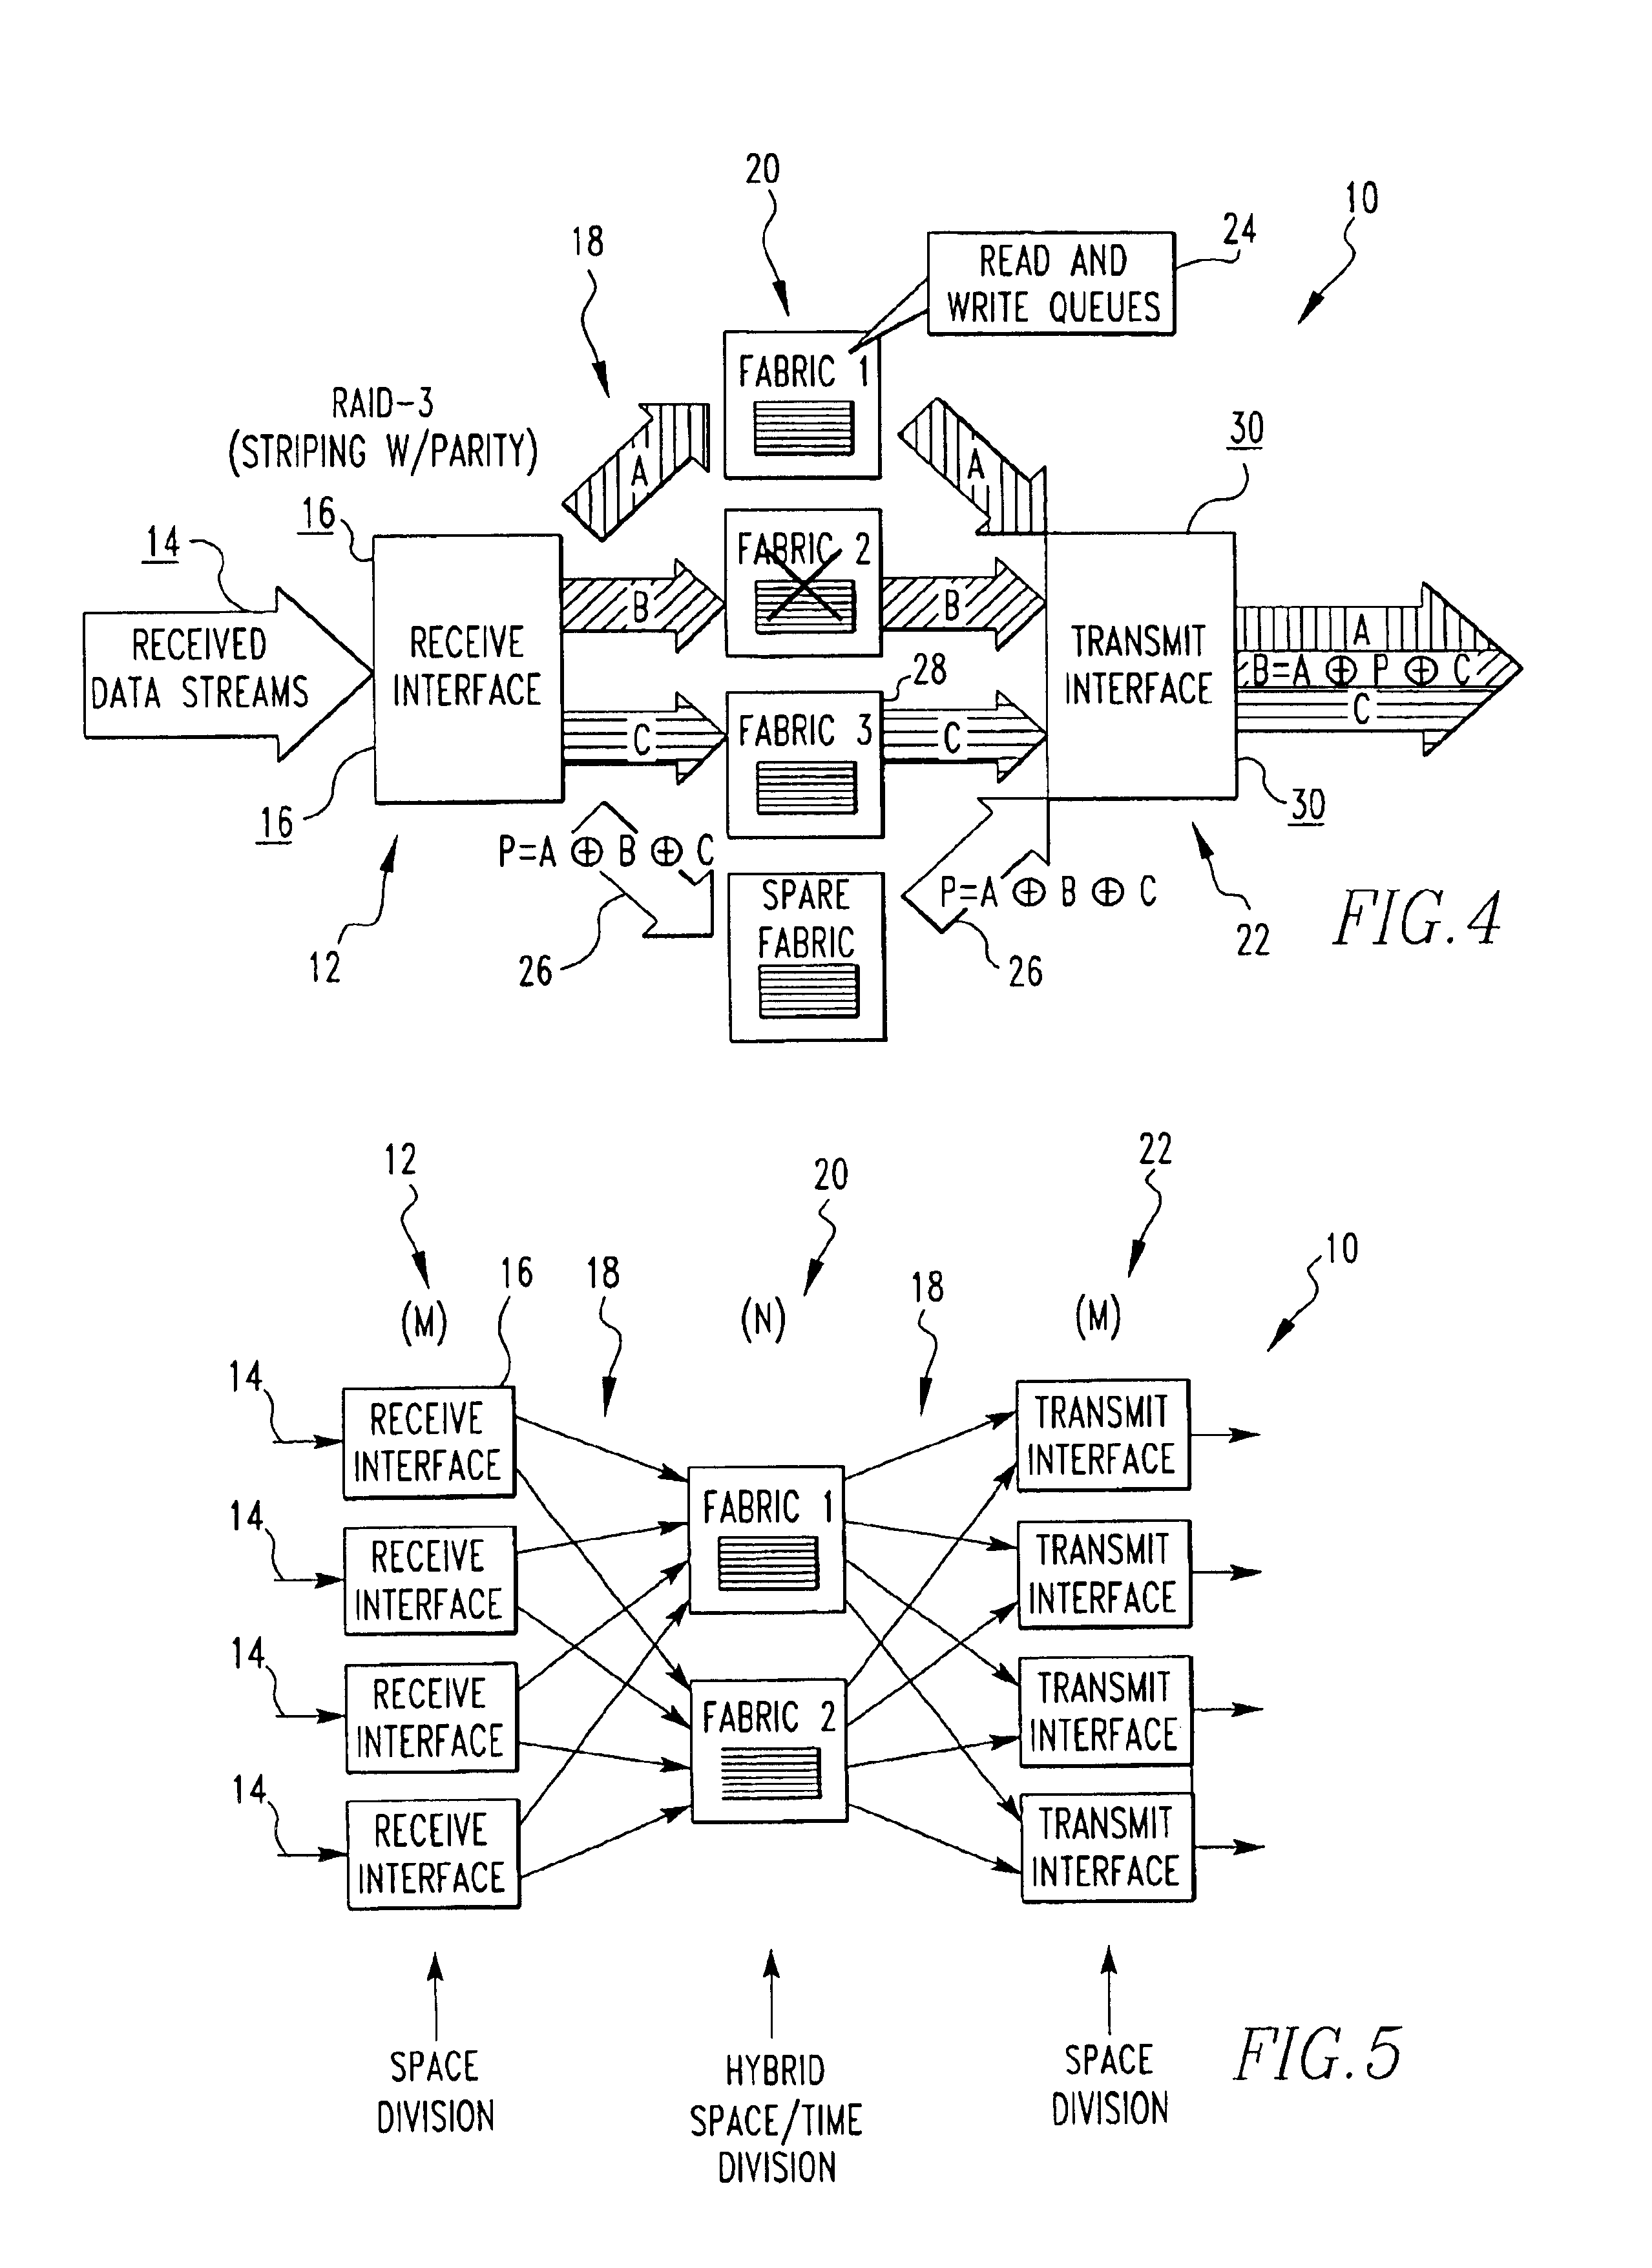 Data striping based switching system